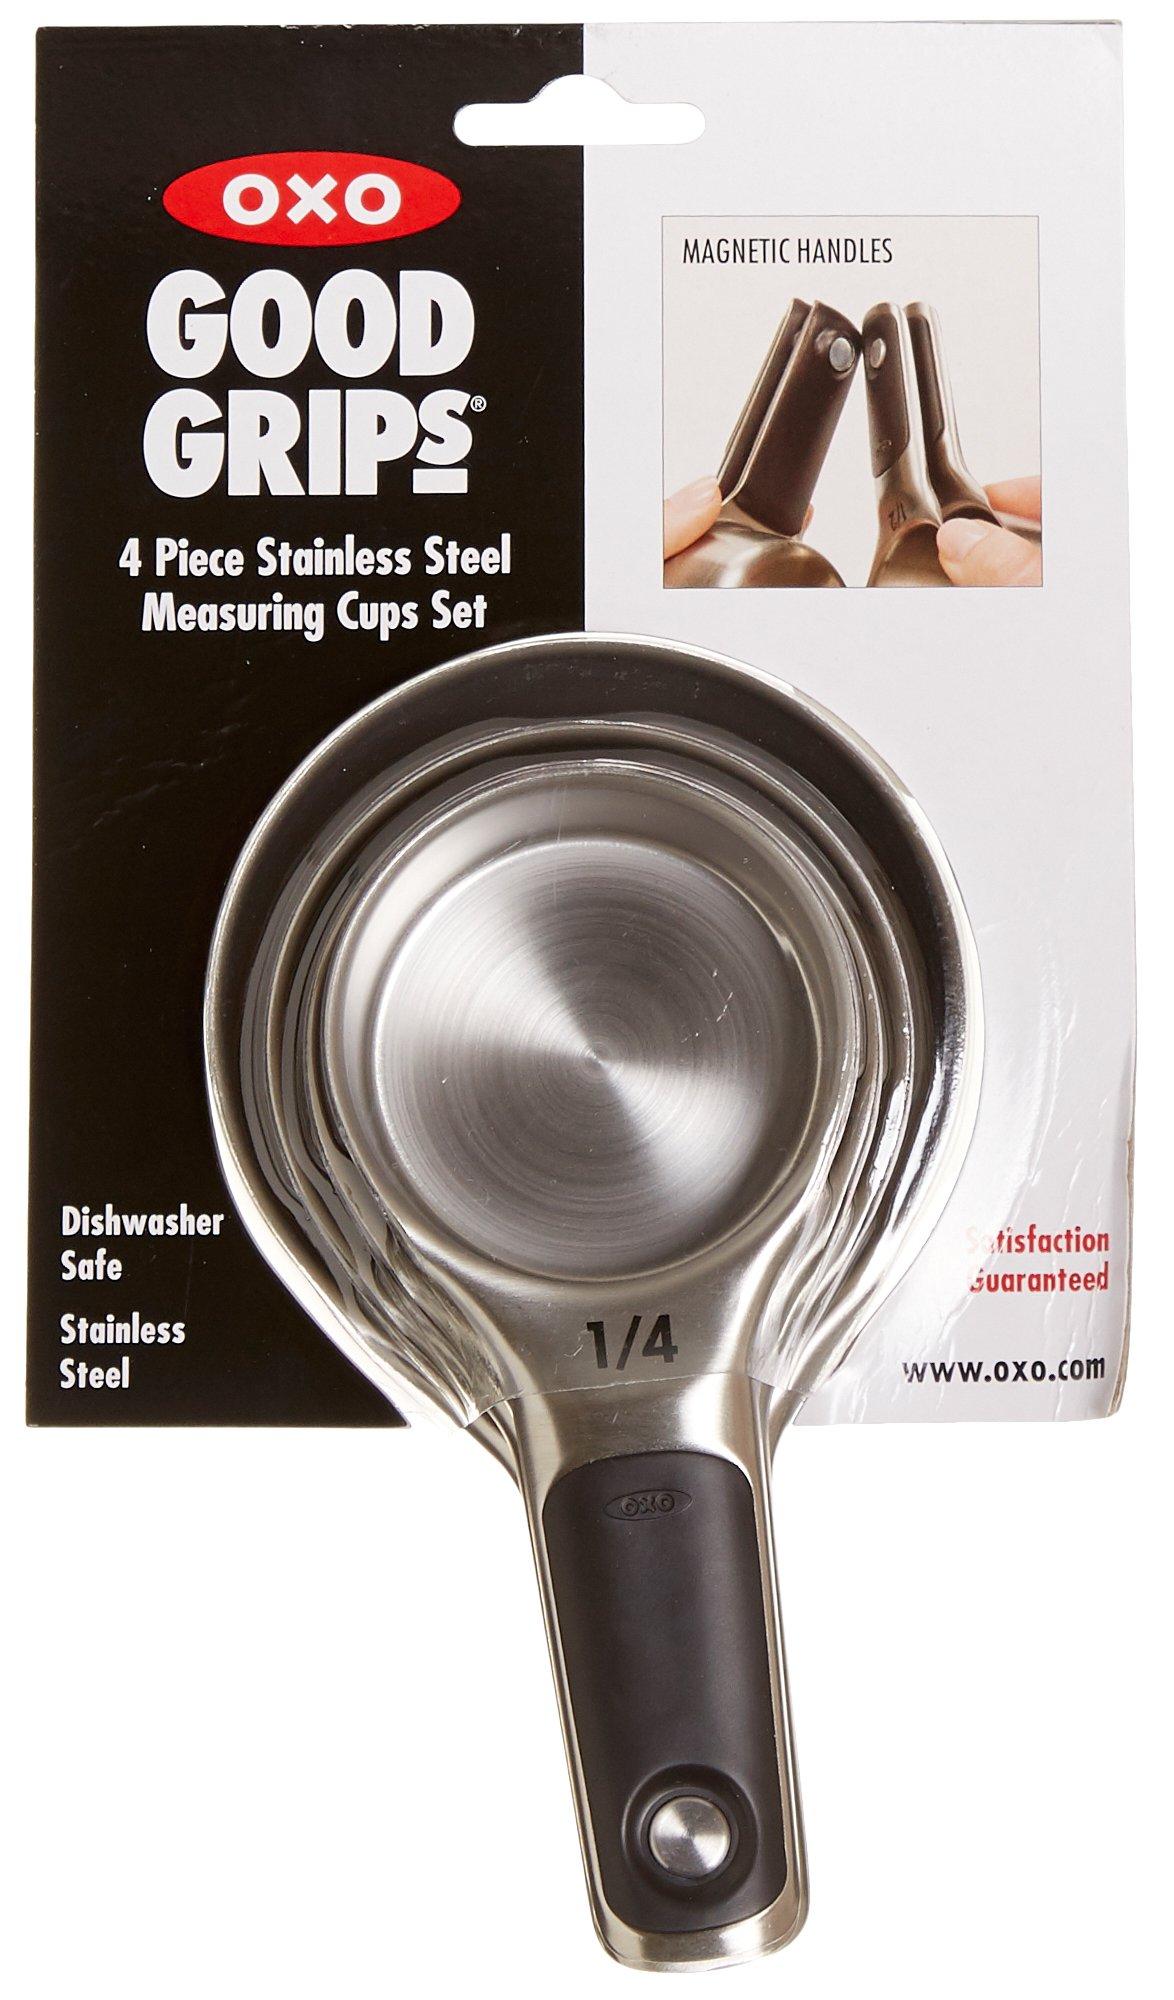 https://images.beallsflorida.com/i/beallsflorida/650-8564-2191-00-yyy/*Good-Grips-4-pc.-Stainless-Steel-Measuring-Cup-Set*?$product$&fmt=auto&qlt=default